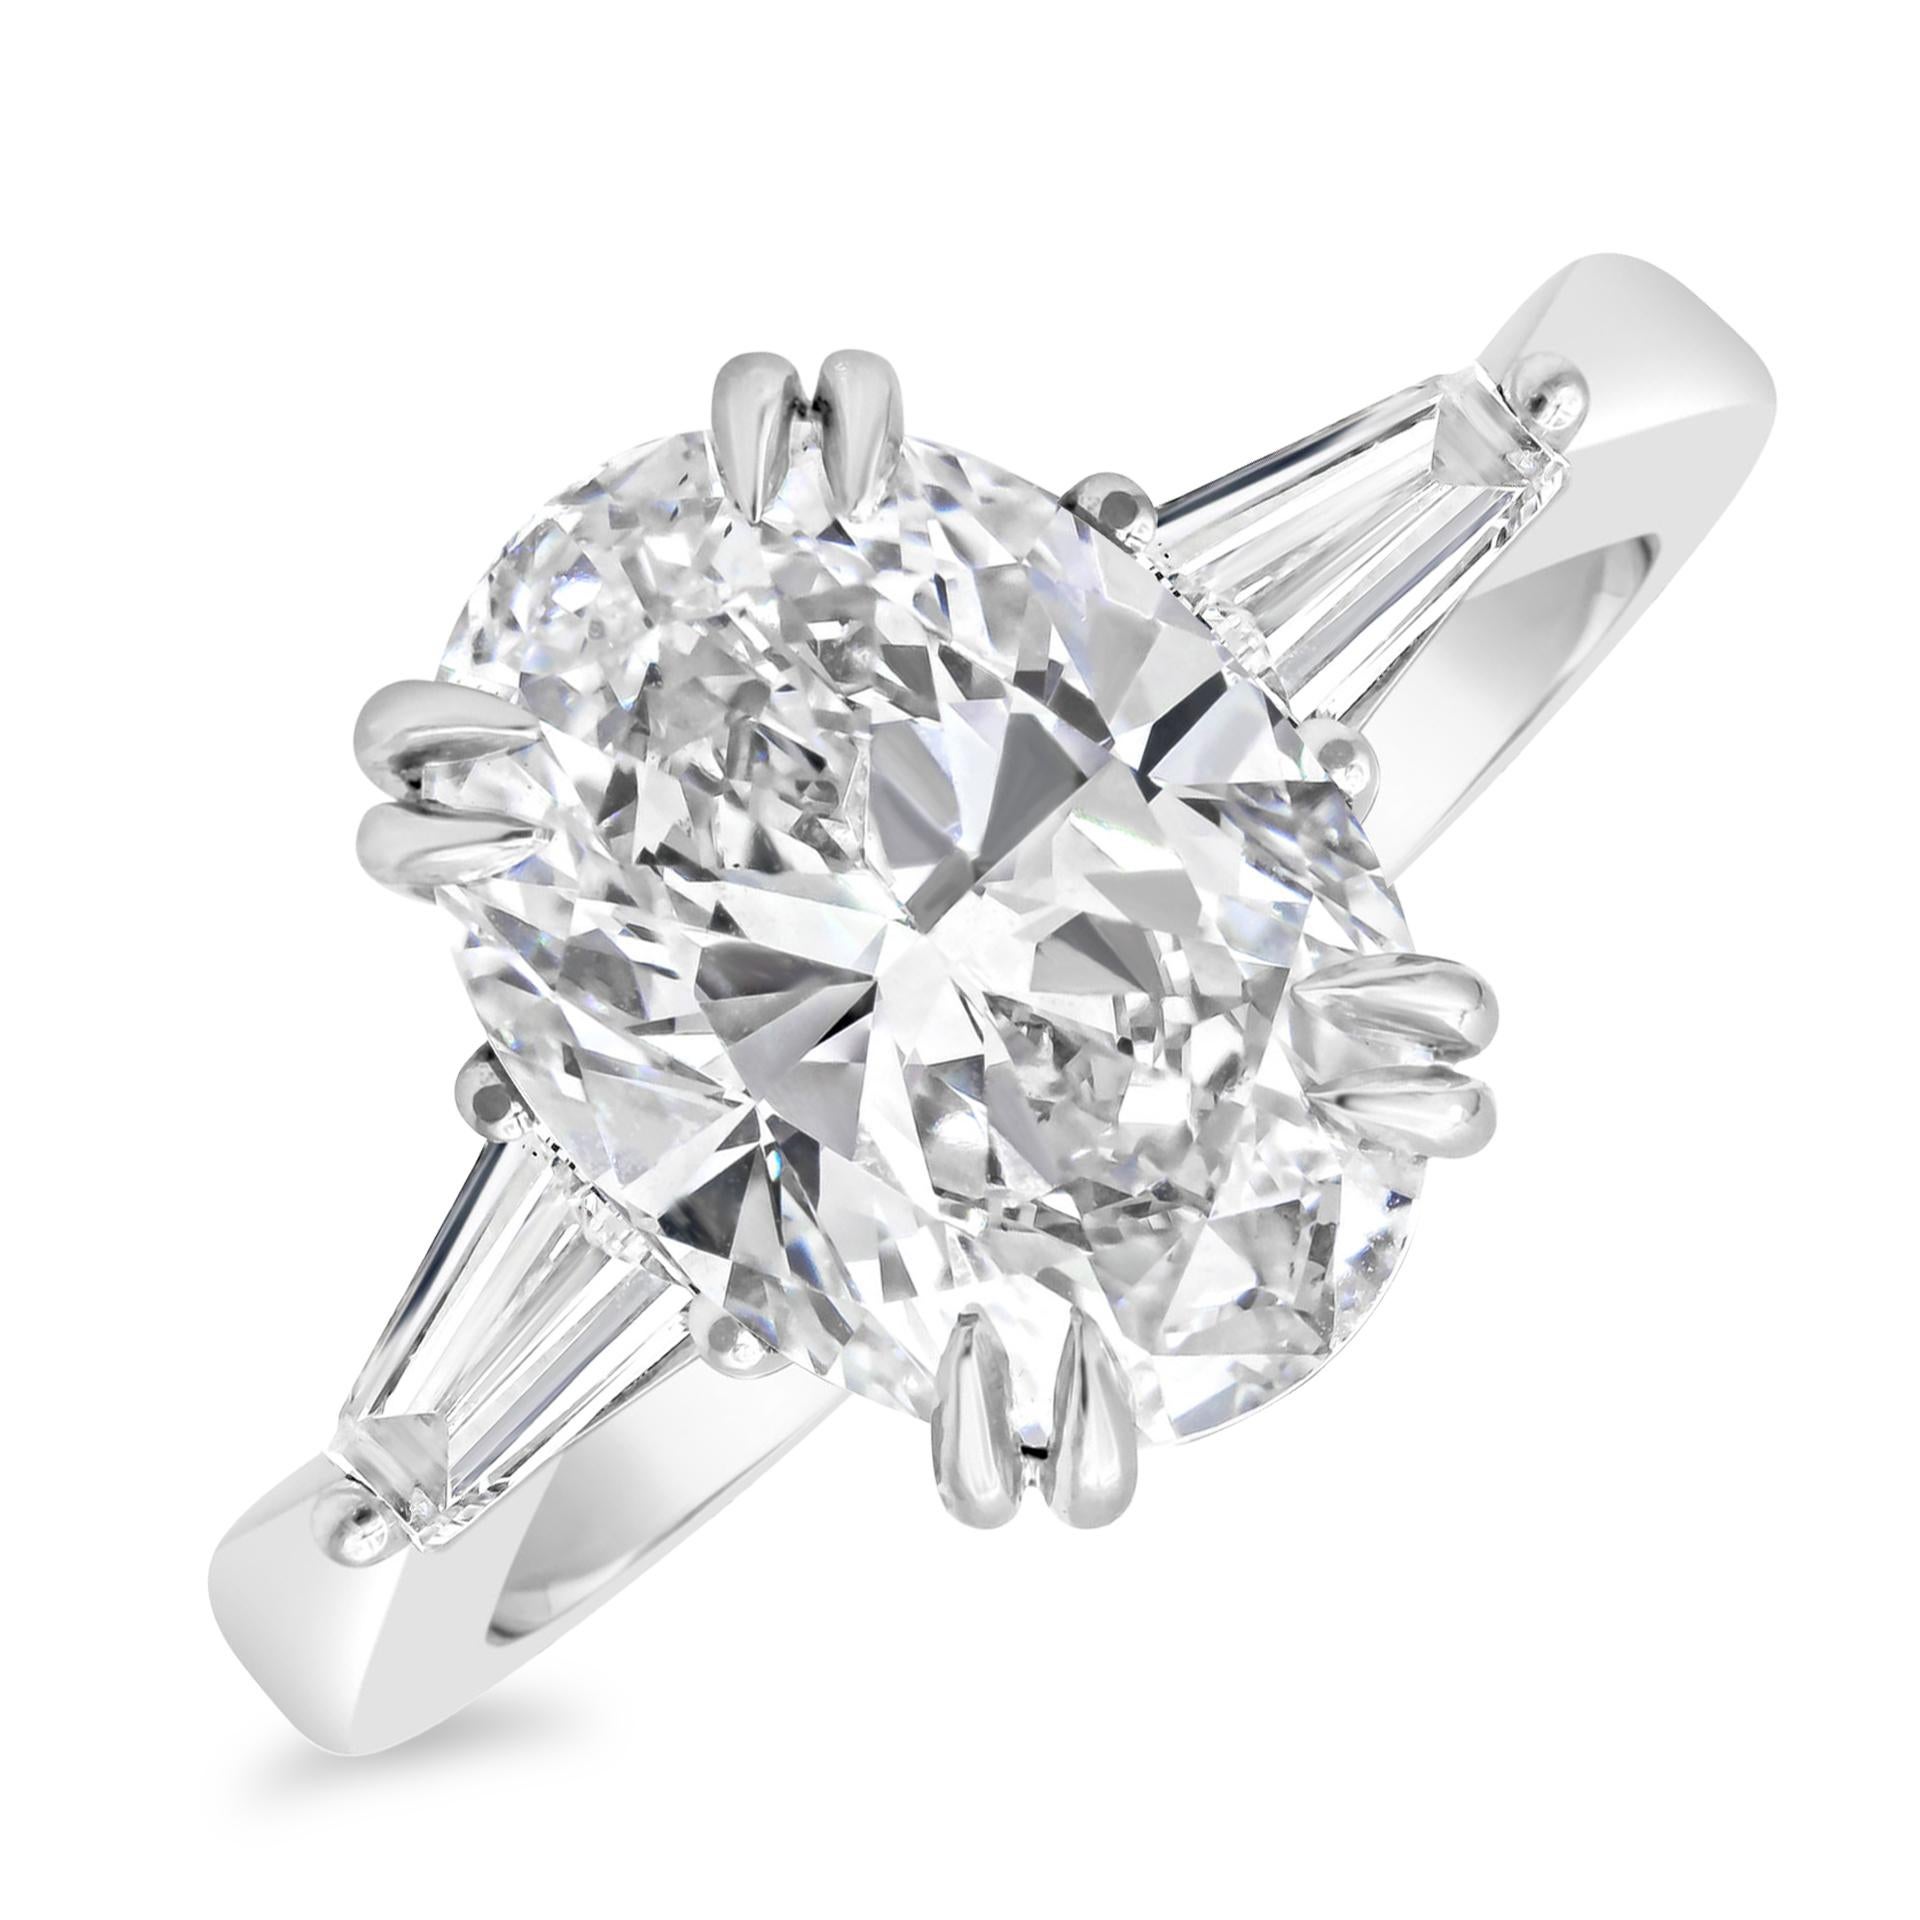 Featuring a GIA Certified 4.01 carats oval cut diamond, G Color and  VS2 in Clarity. Flanking the center are two tapered baguette diamonds weighing 0.54 carats total. Set in a double prong setting. Made with polished Platinum. Size 6 US and